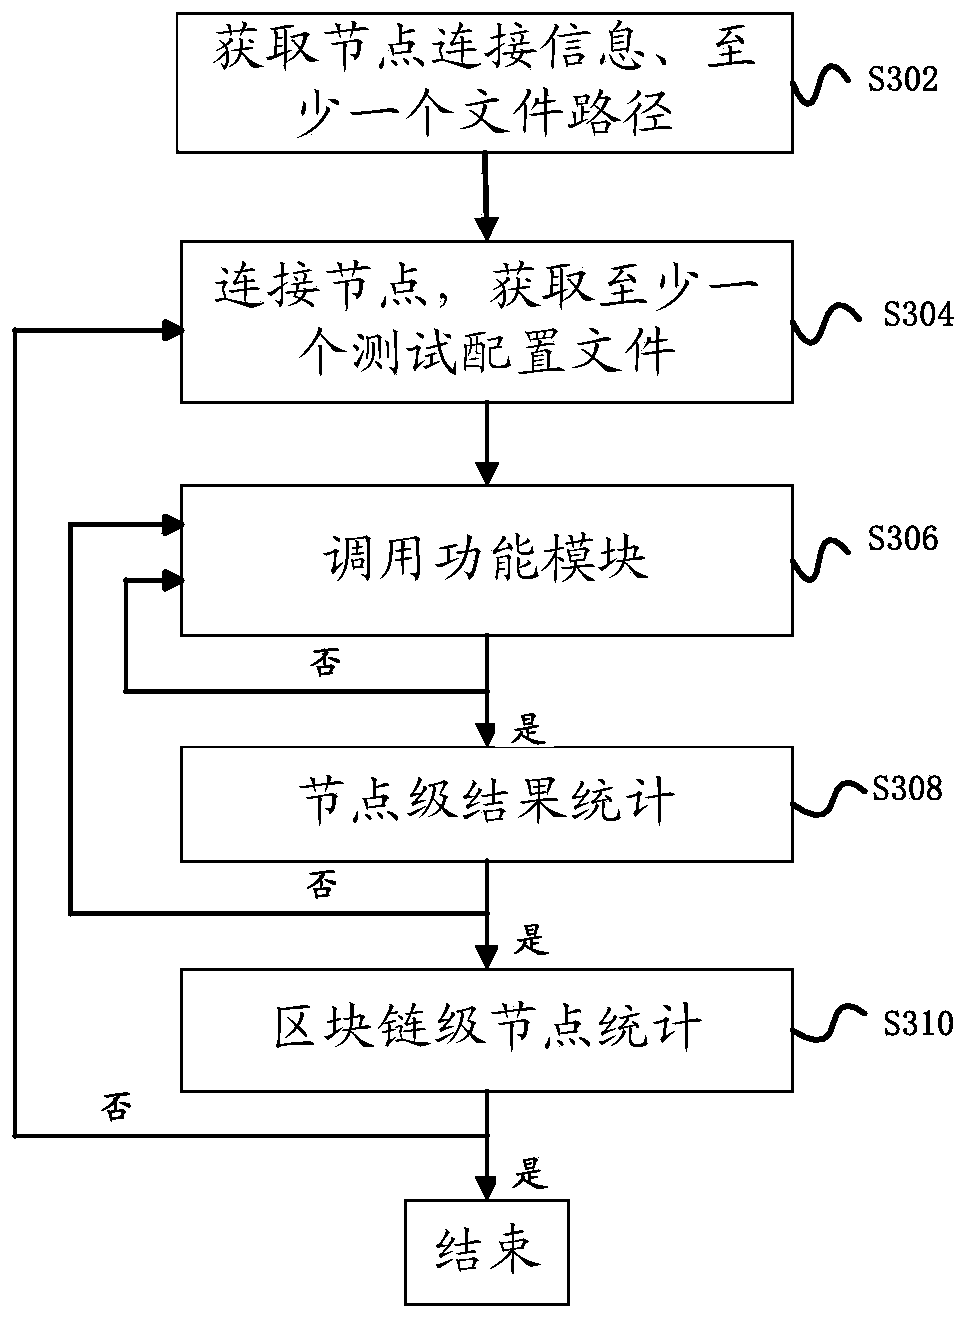 Automatic testing method and device